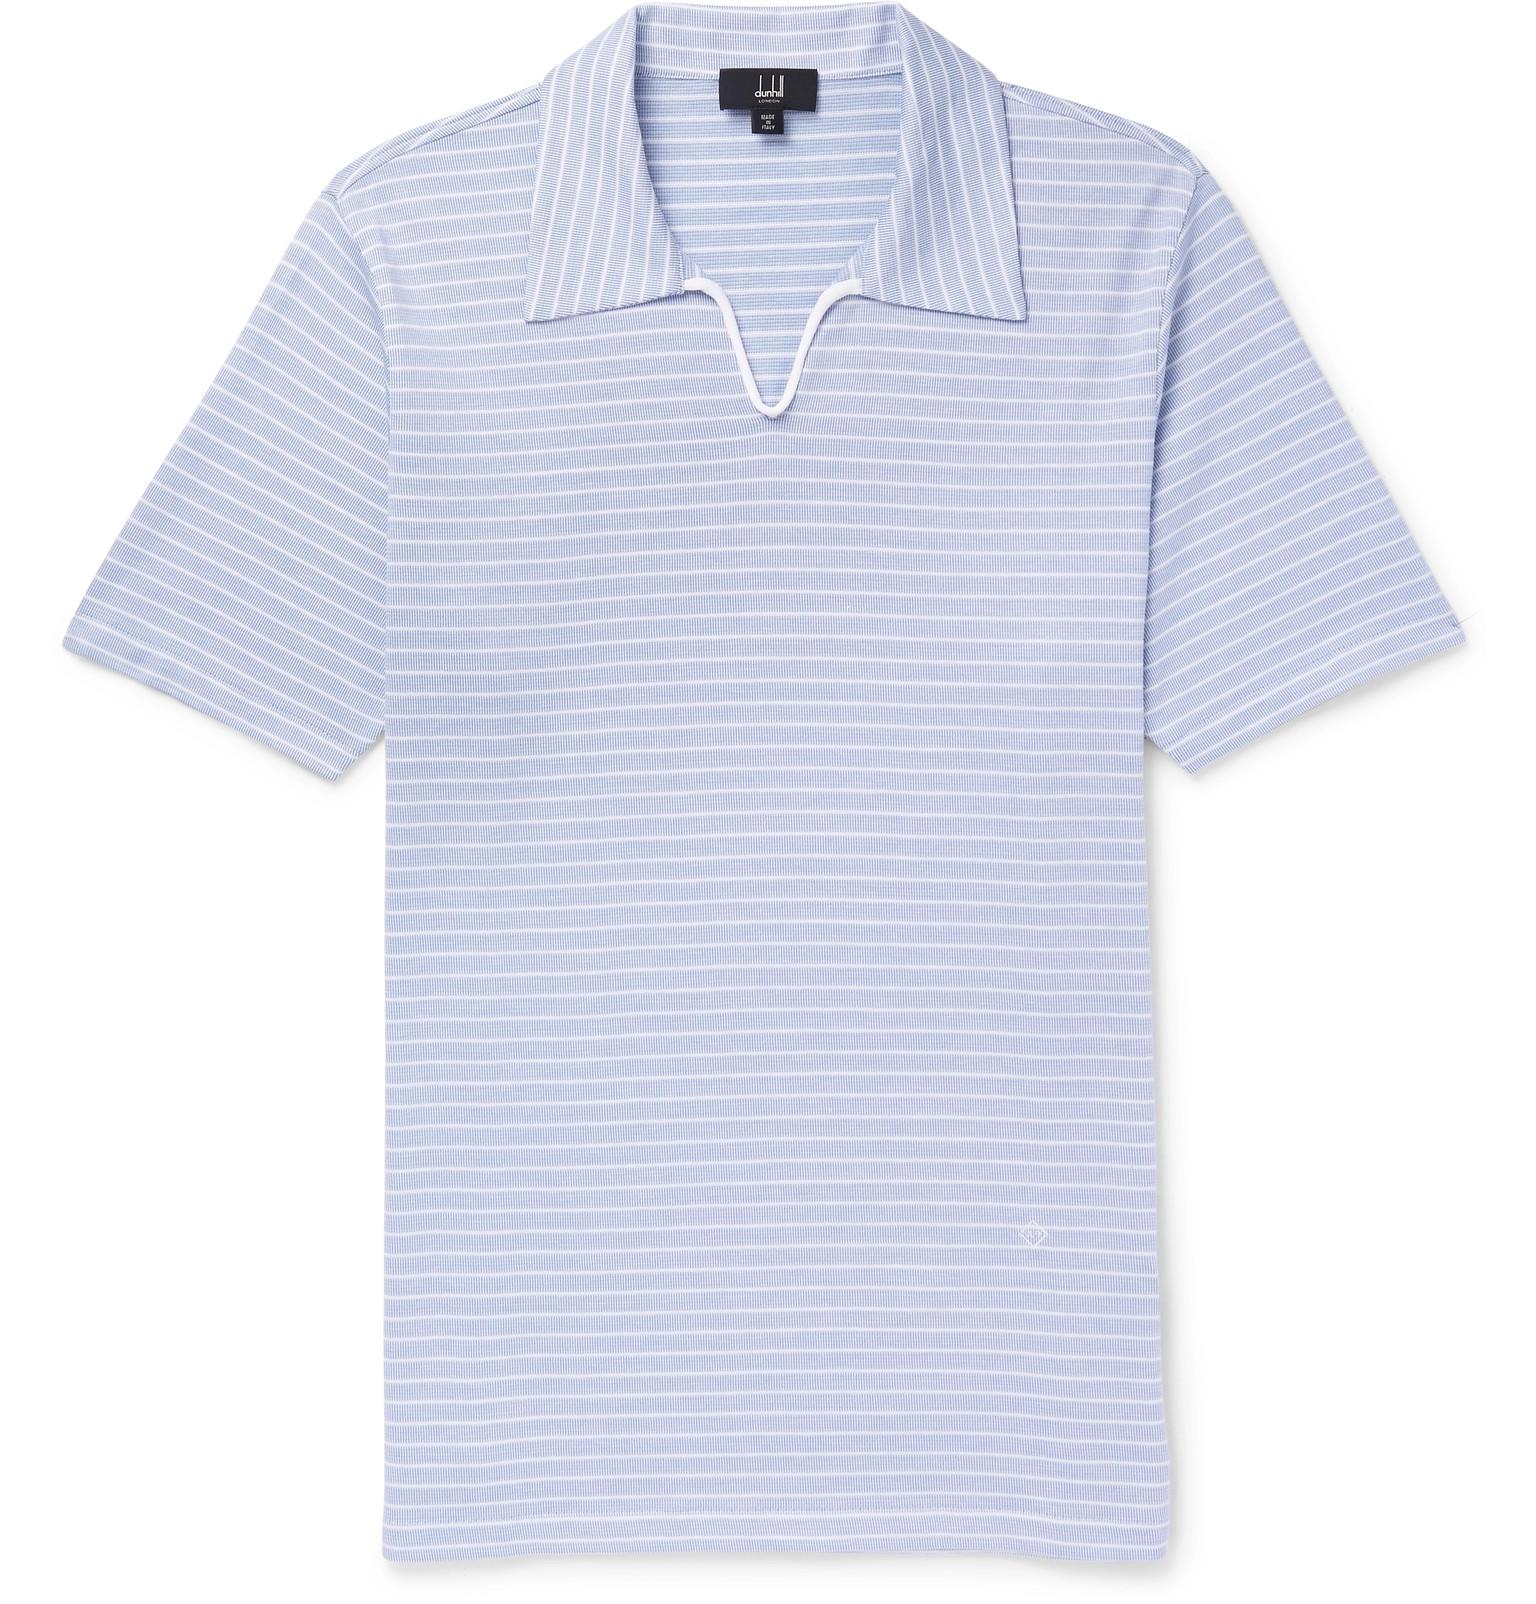 Lyst - Dunhill Striped Cotton Polo Shirt in Blue for Men